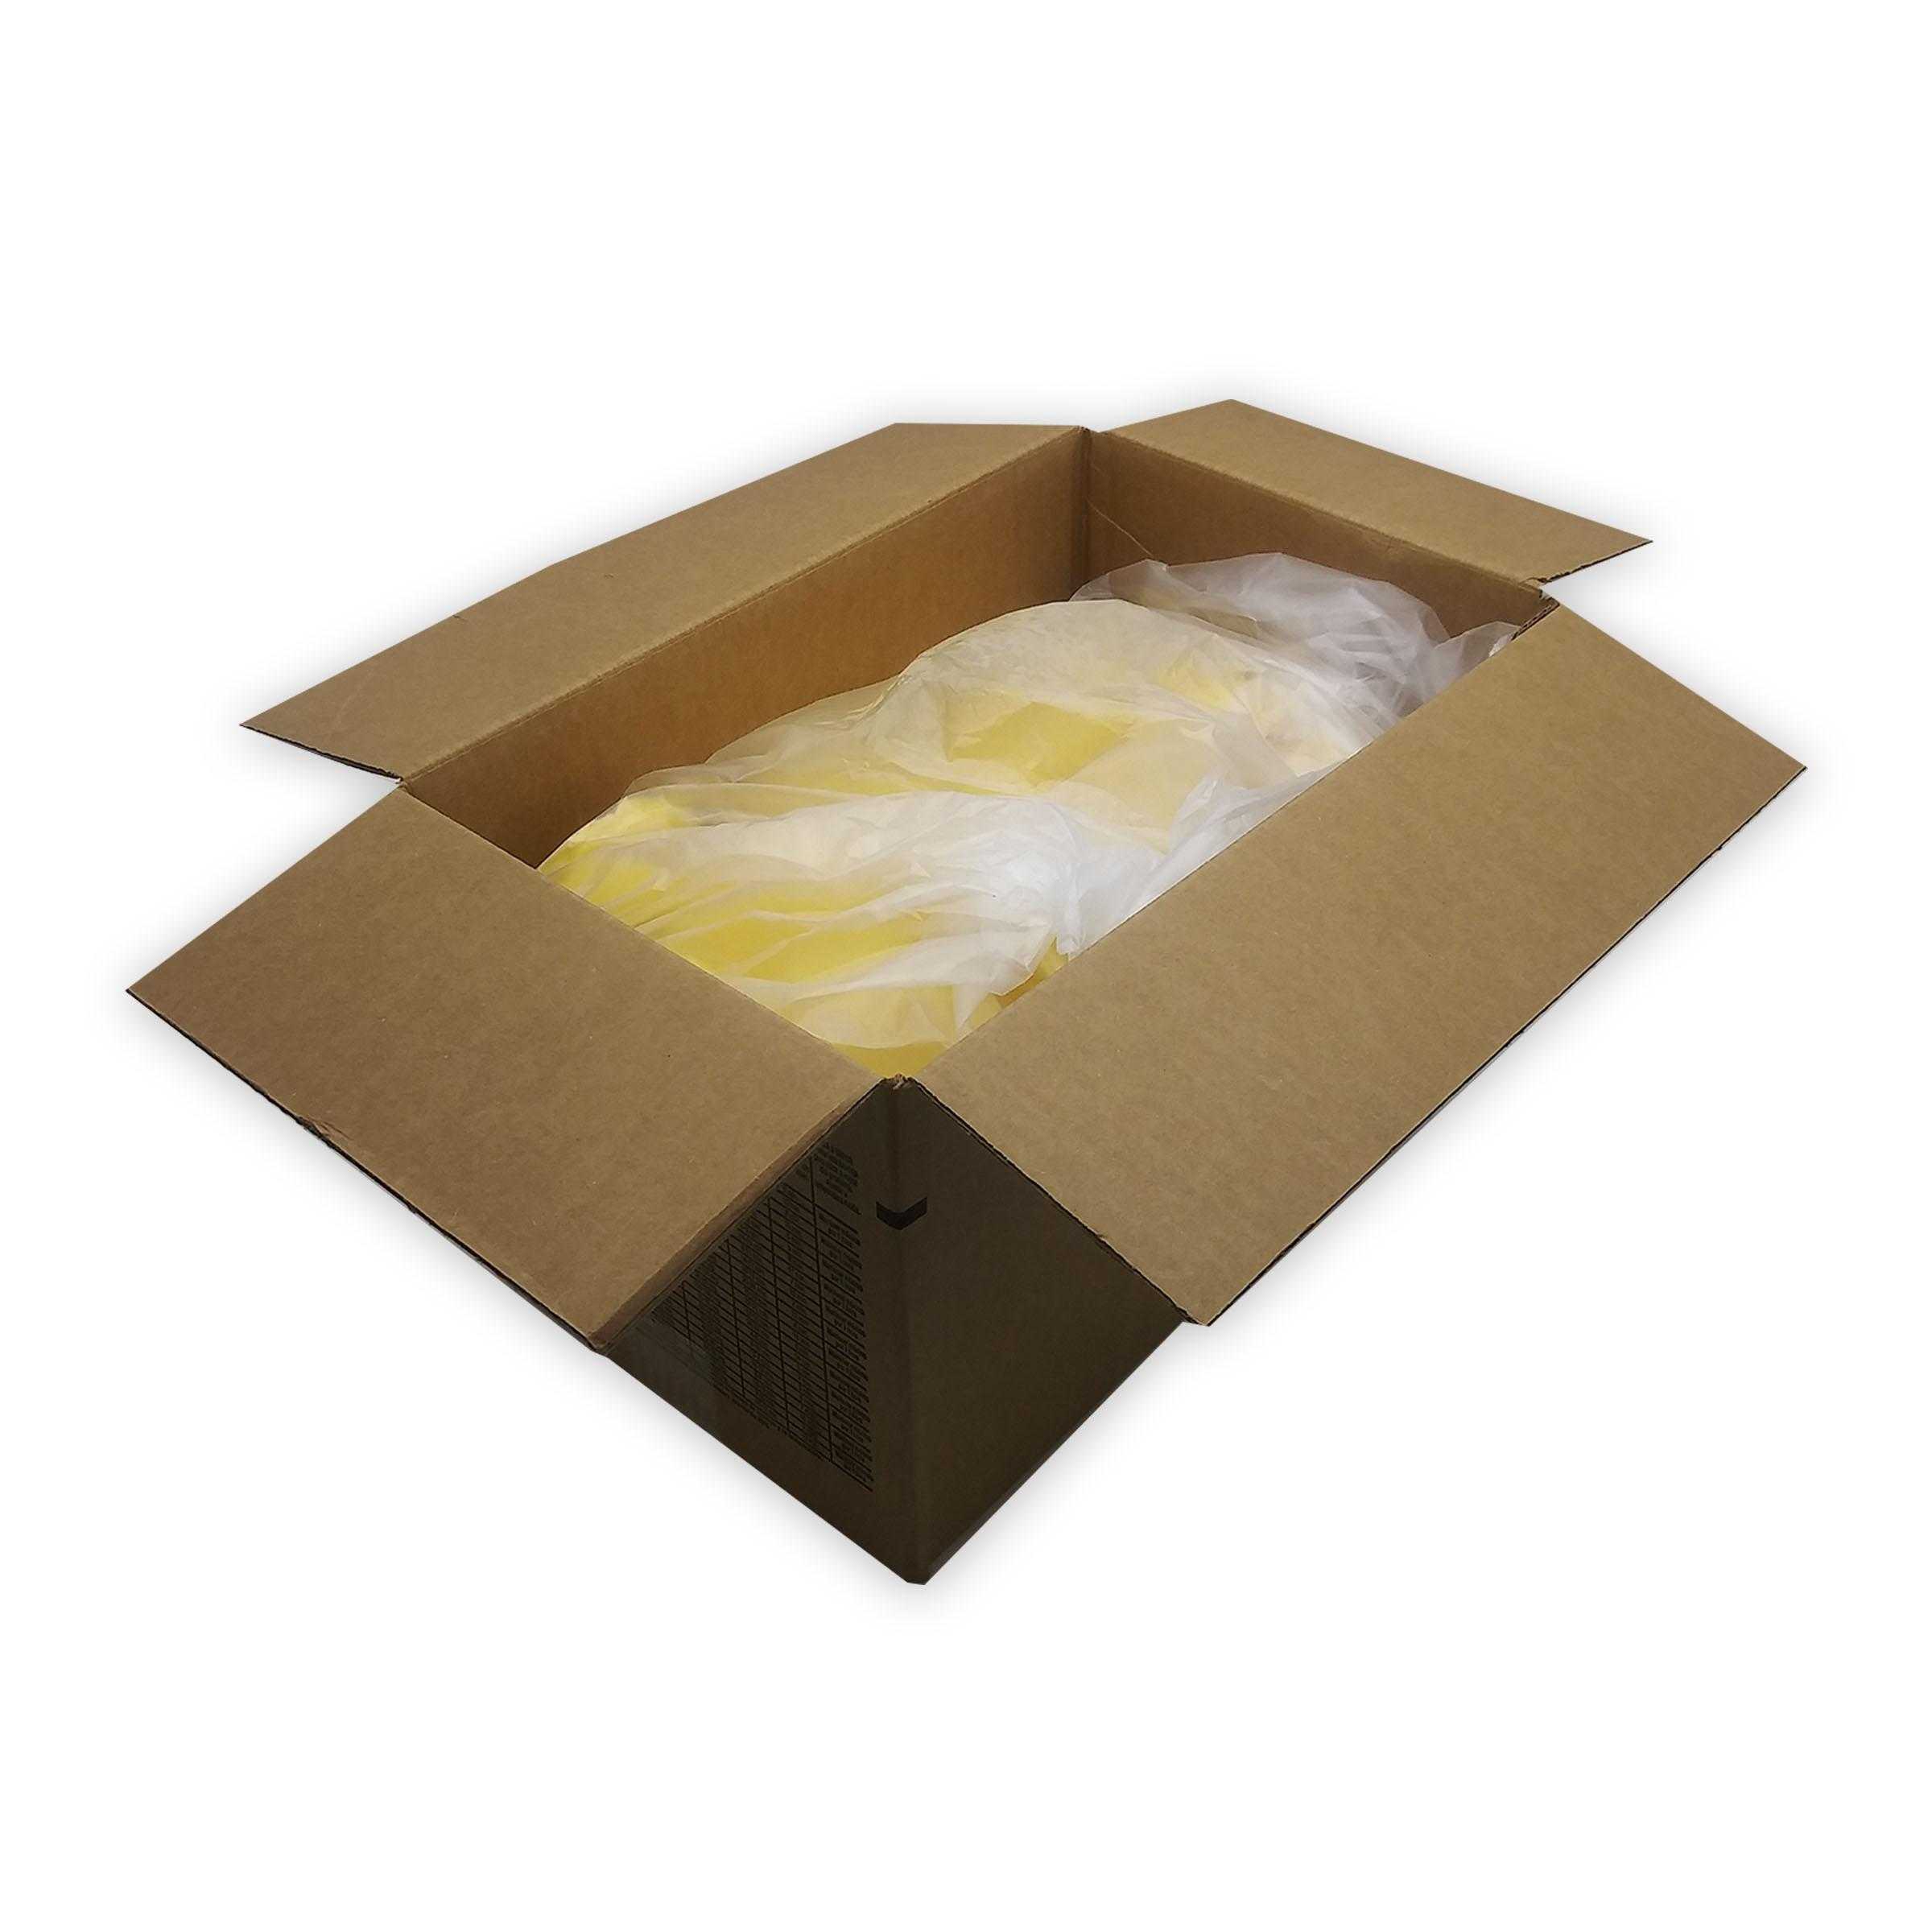 Abbotsford Farms® Certified Cage-Free Fully-Cooked Quarter-Folded Whole Egg Wrap, 90/3.0 oz.